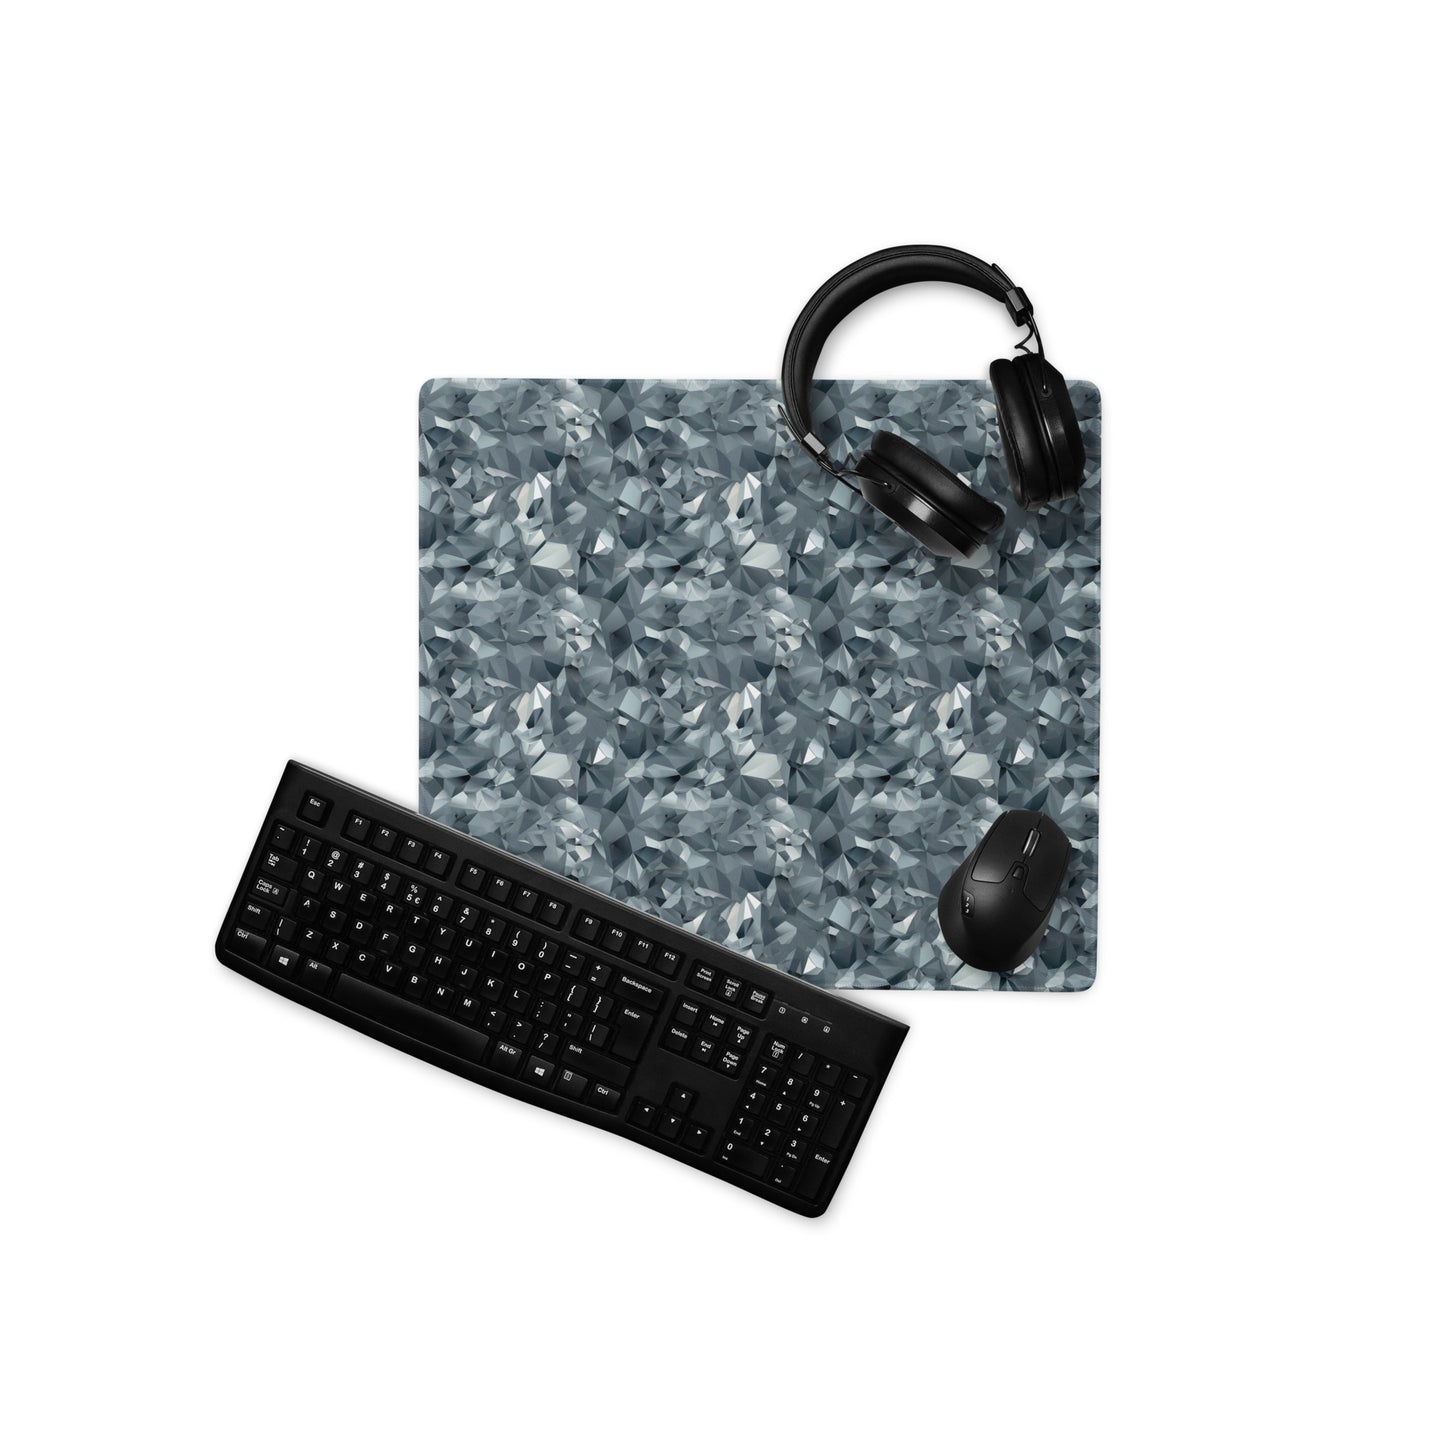 An 18" x 16" gaming desk pad with gray crystals. A keyboard, mouse, and headphones sit on it.